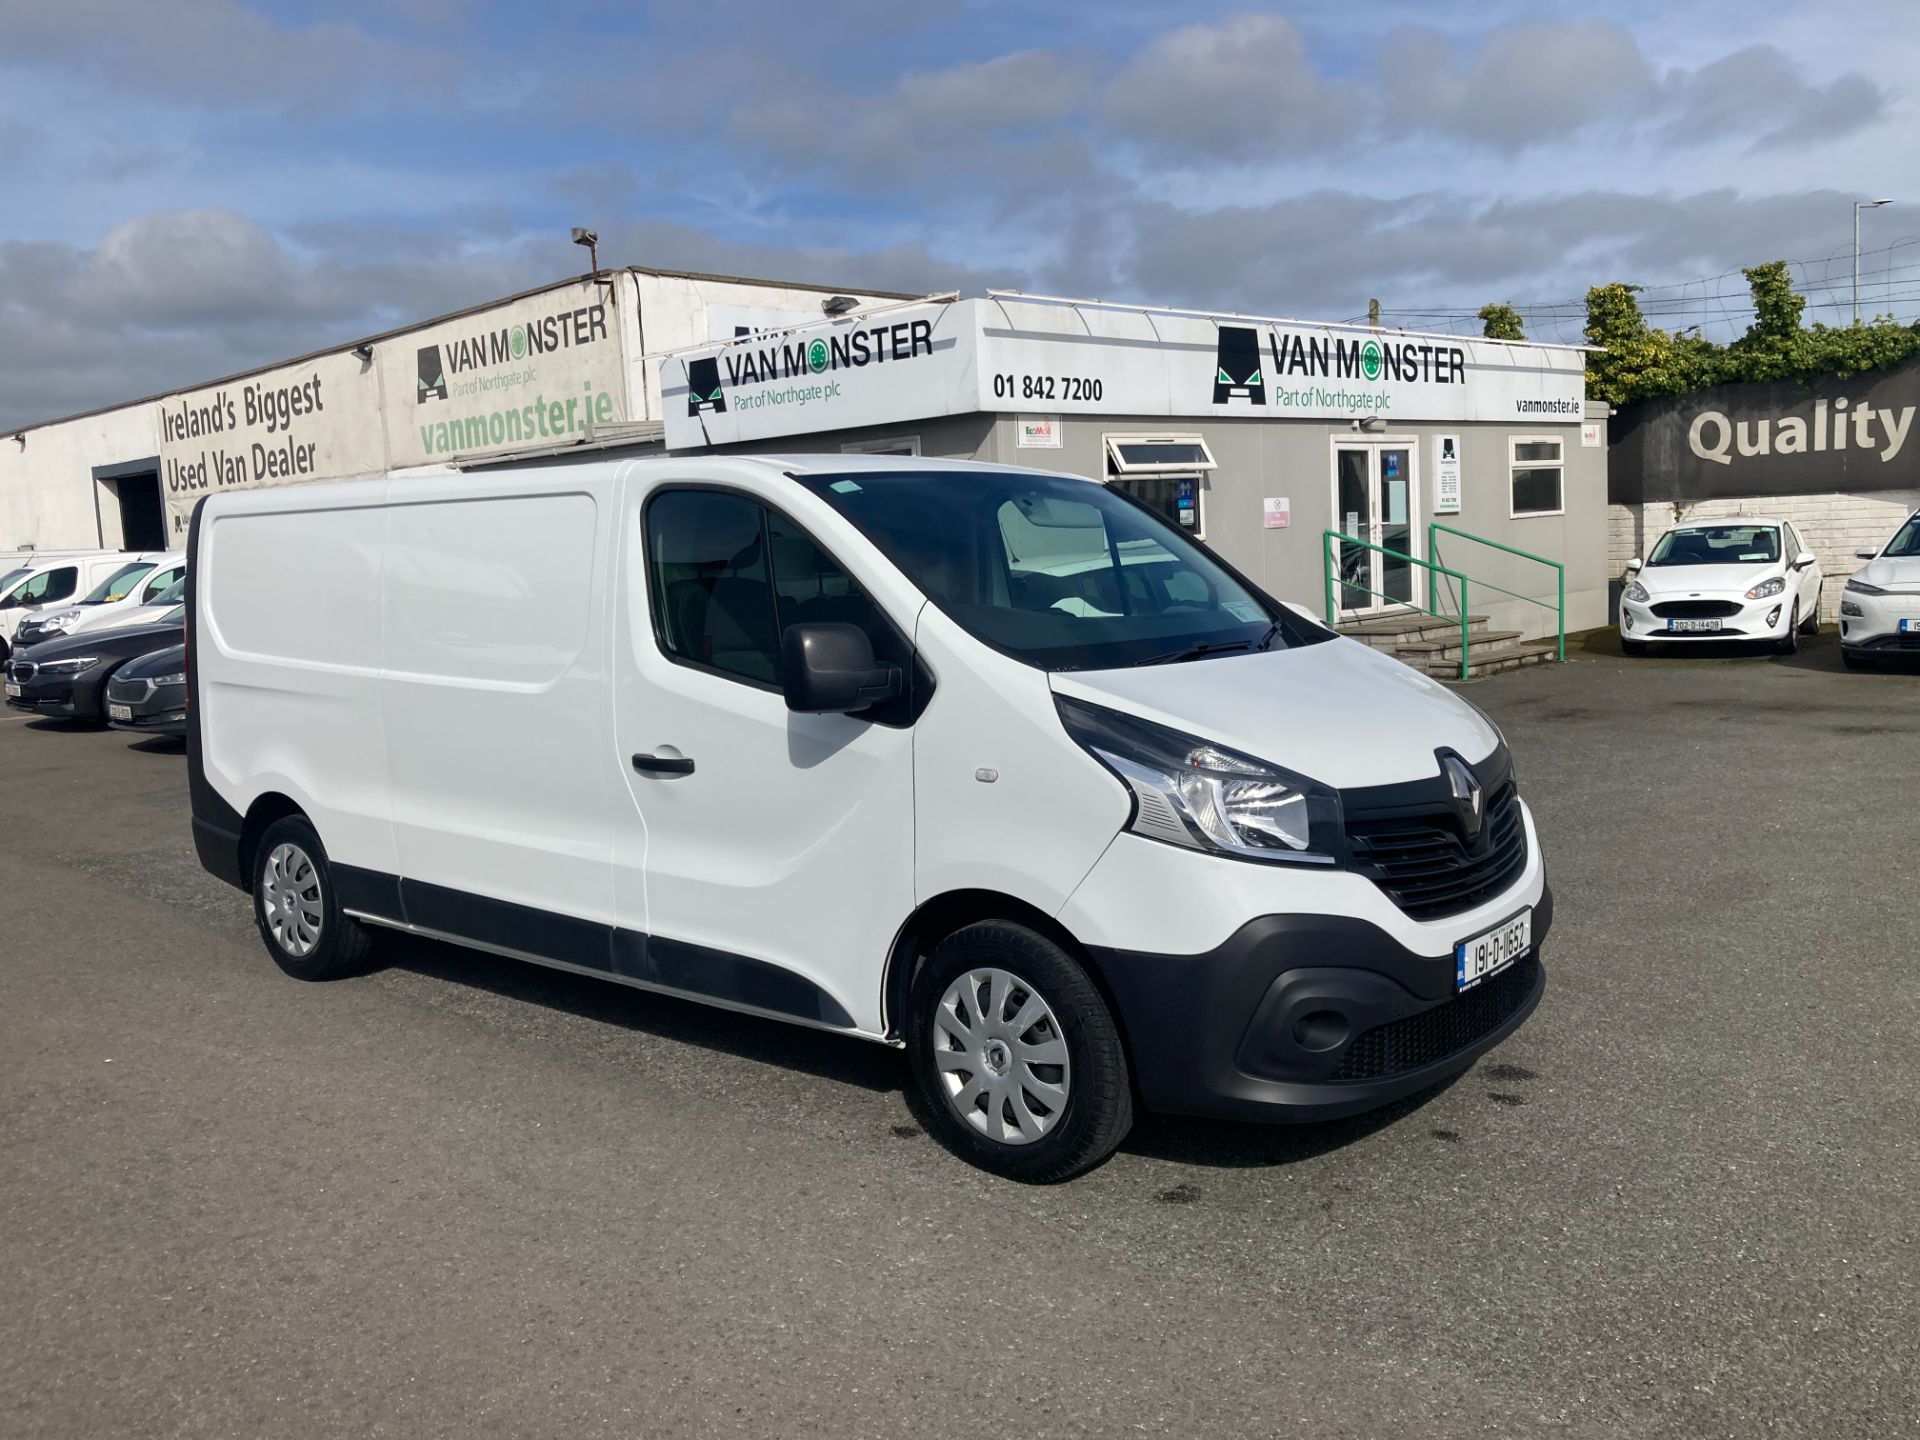 2019 Renault Trafic LL29 DCI 120 Business (191D11652)